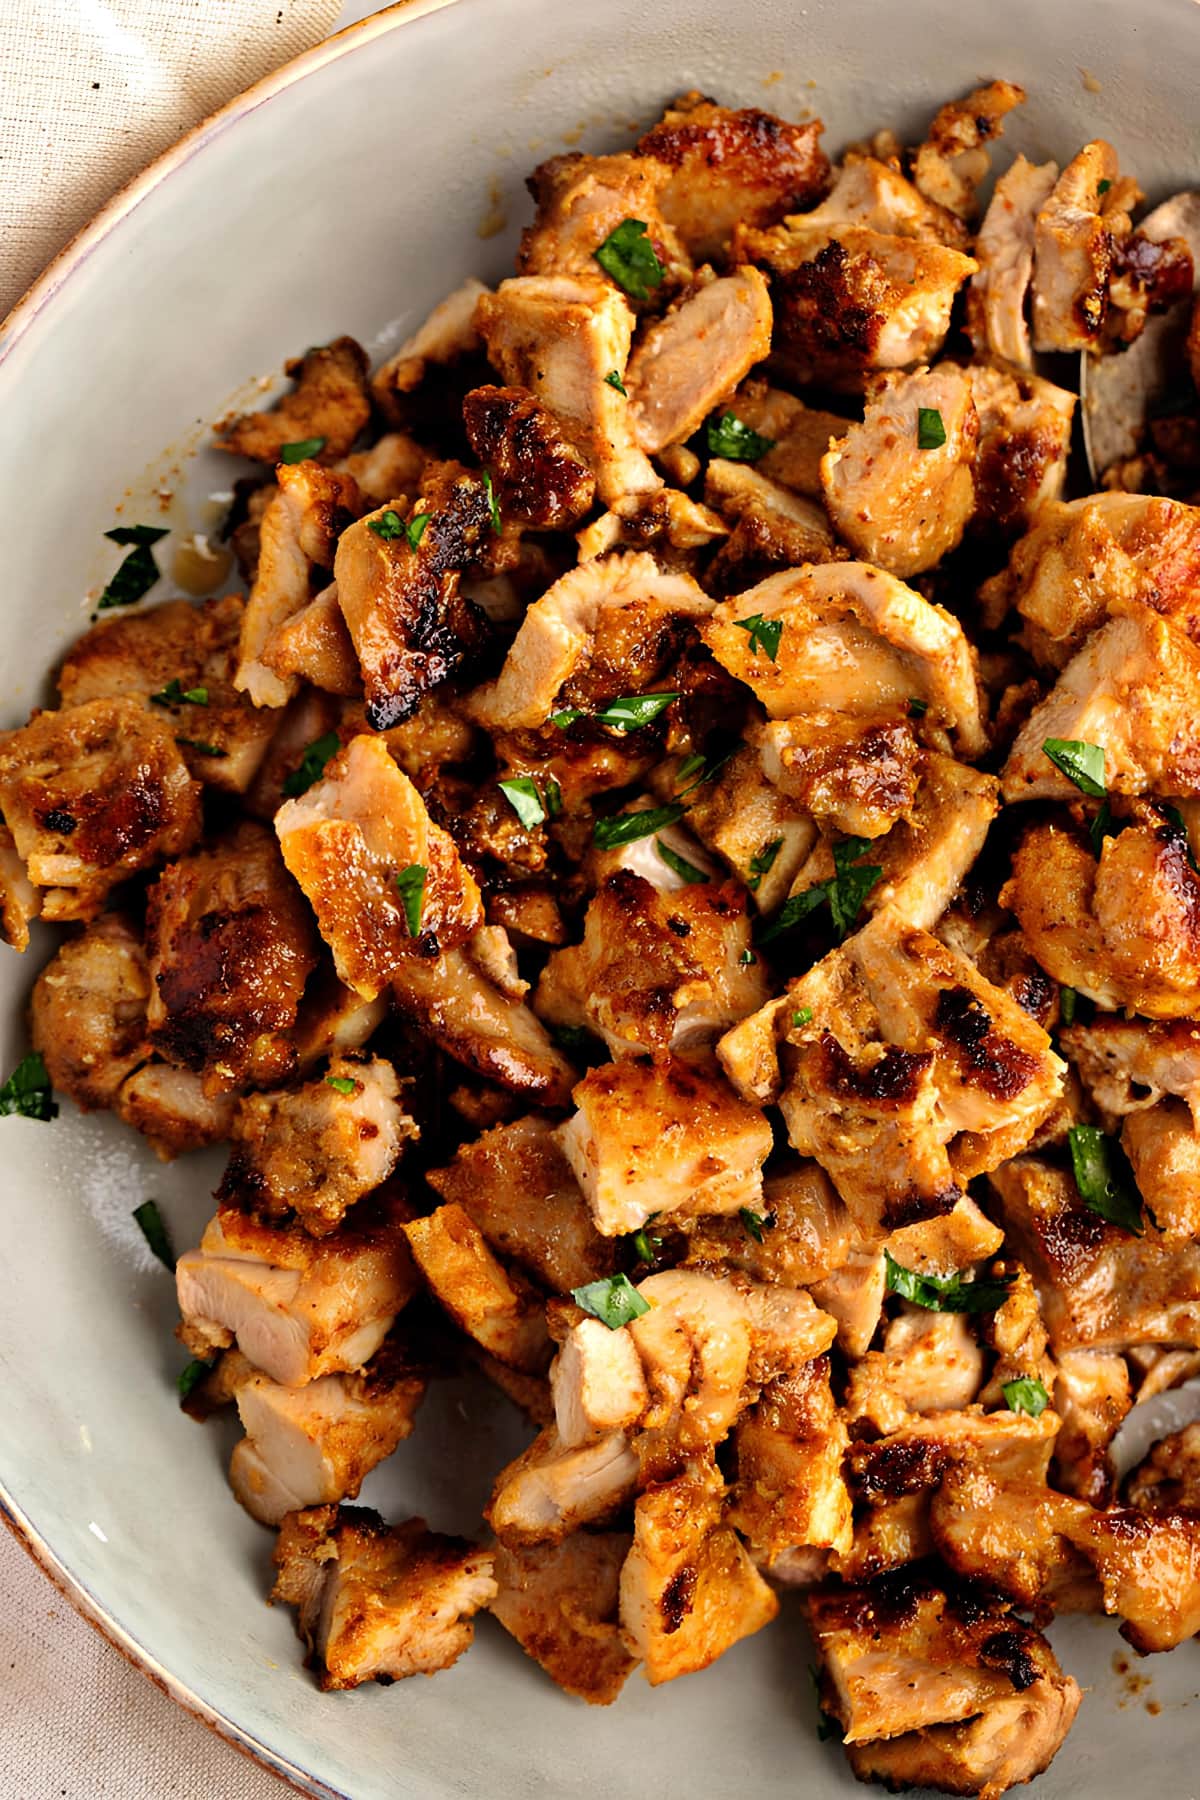 Homemade Chipotle Chicken with Herbs and Spices